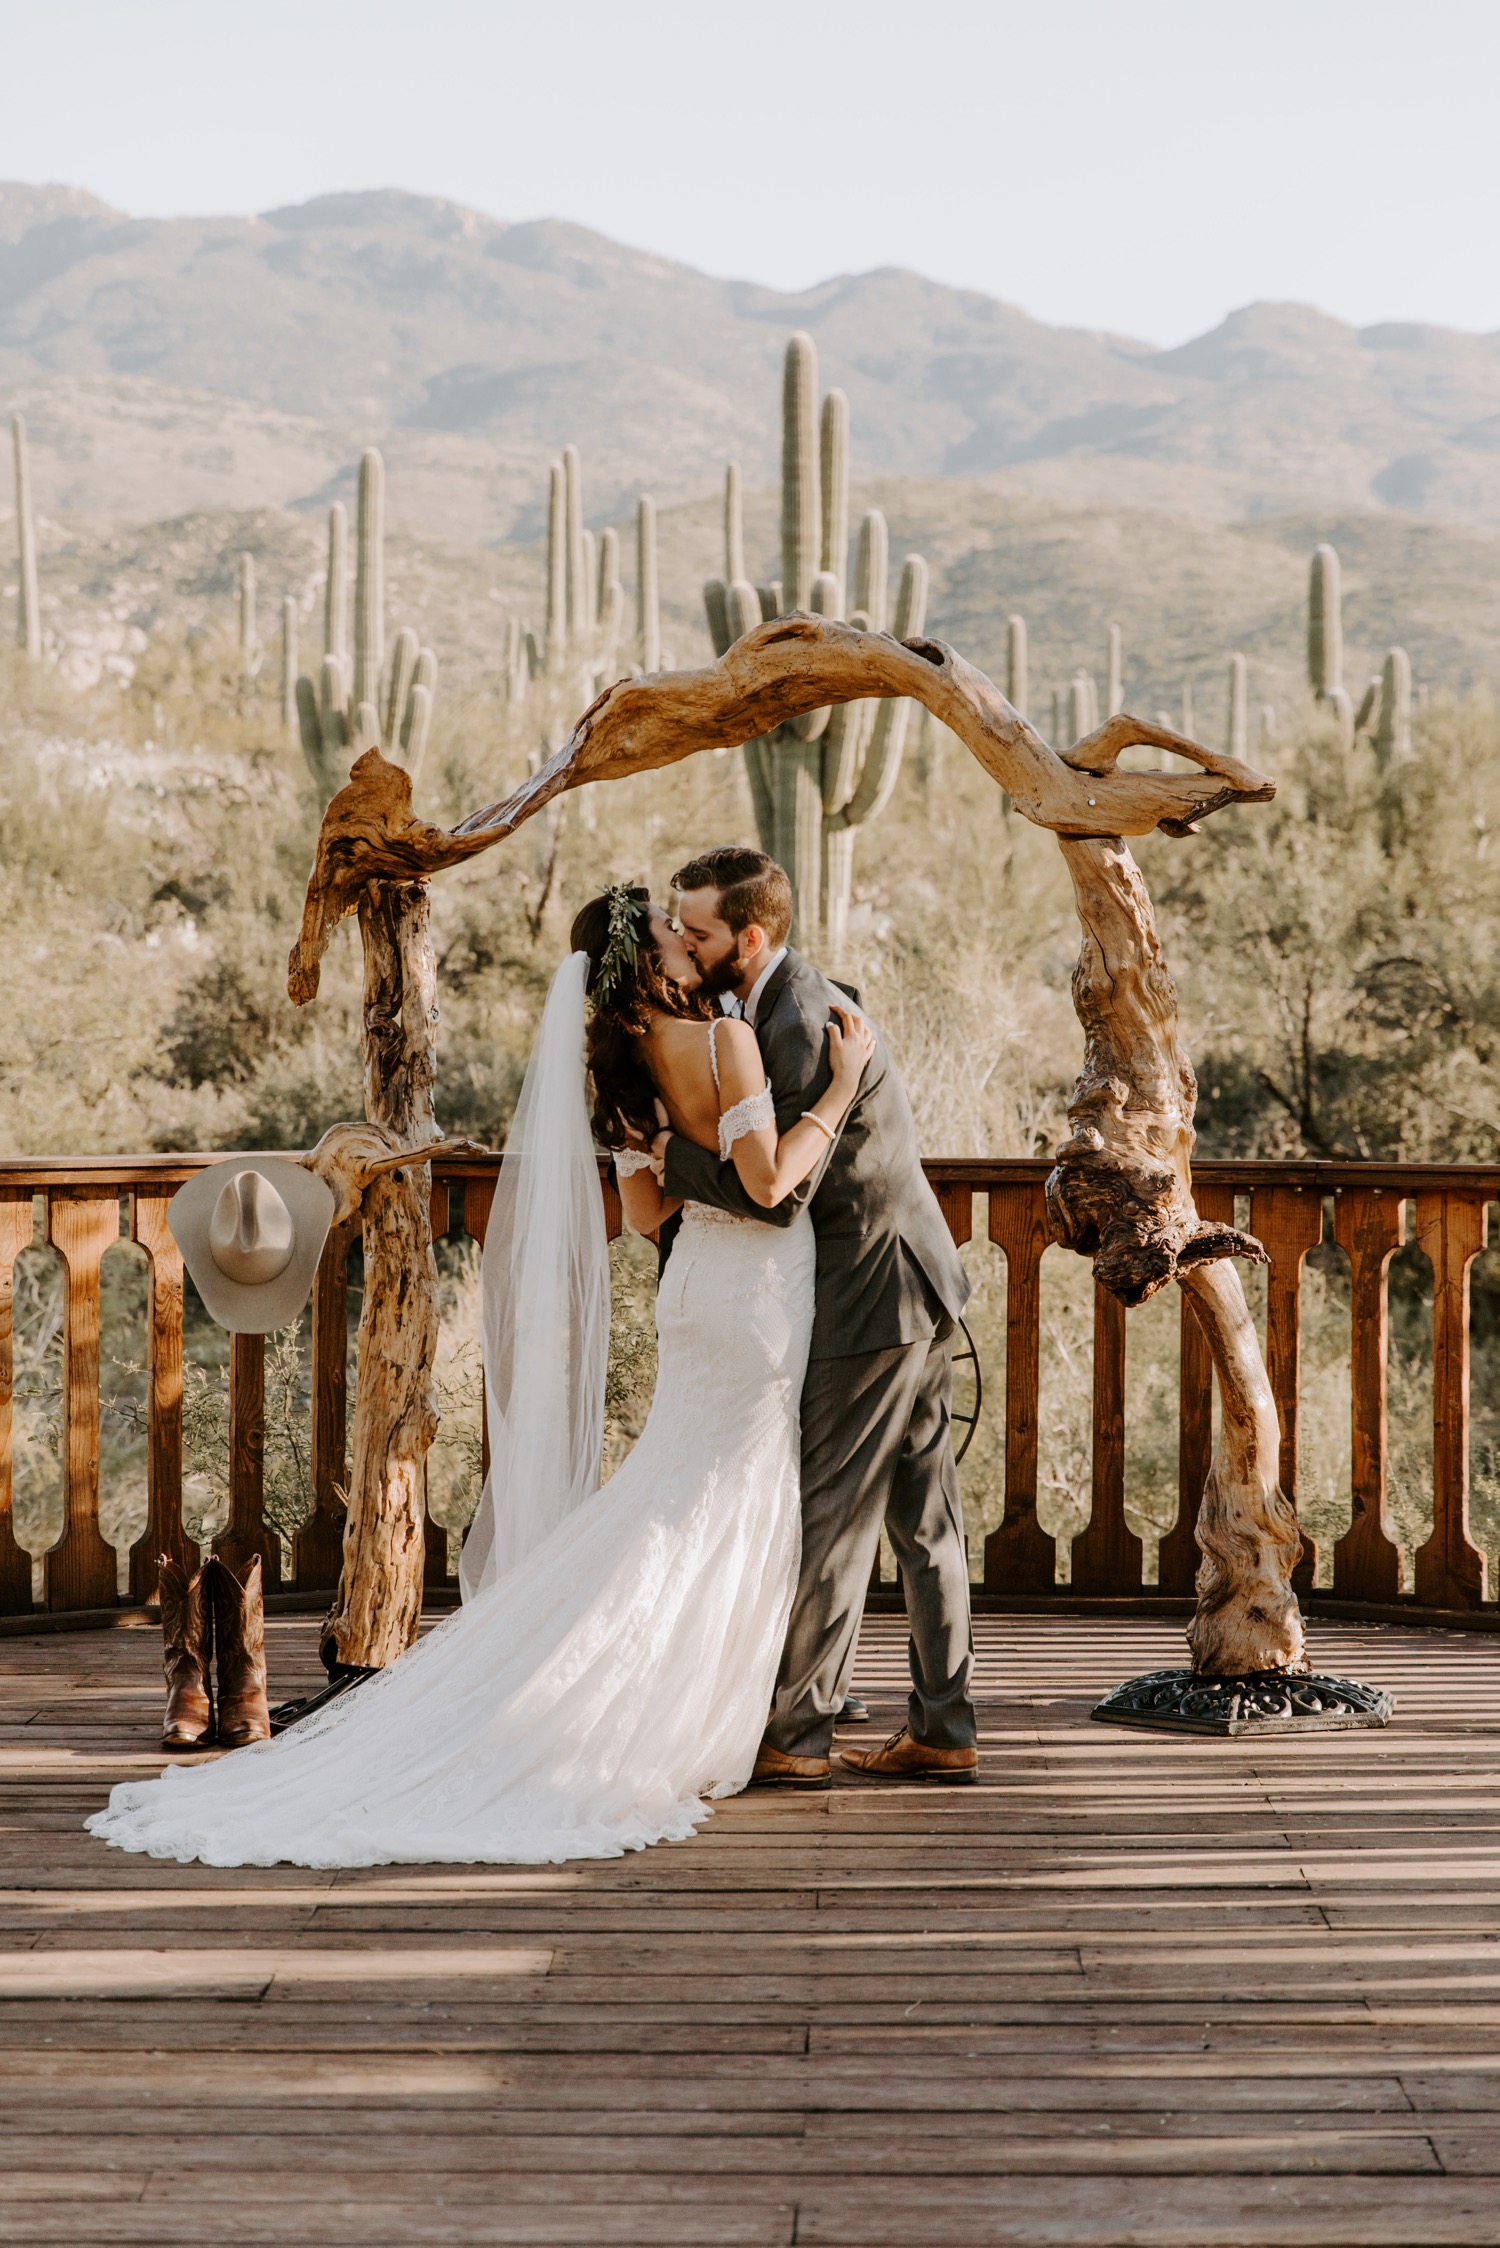 Bride and groom first kiss at ceremony location at Tanque Verde Ranch wedding venue in tucson arizona for a desert inspired wedding